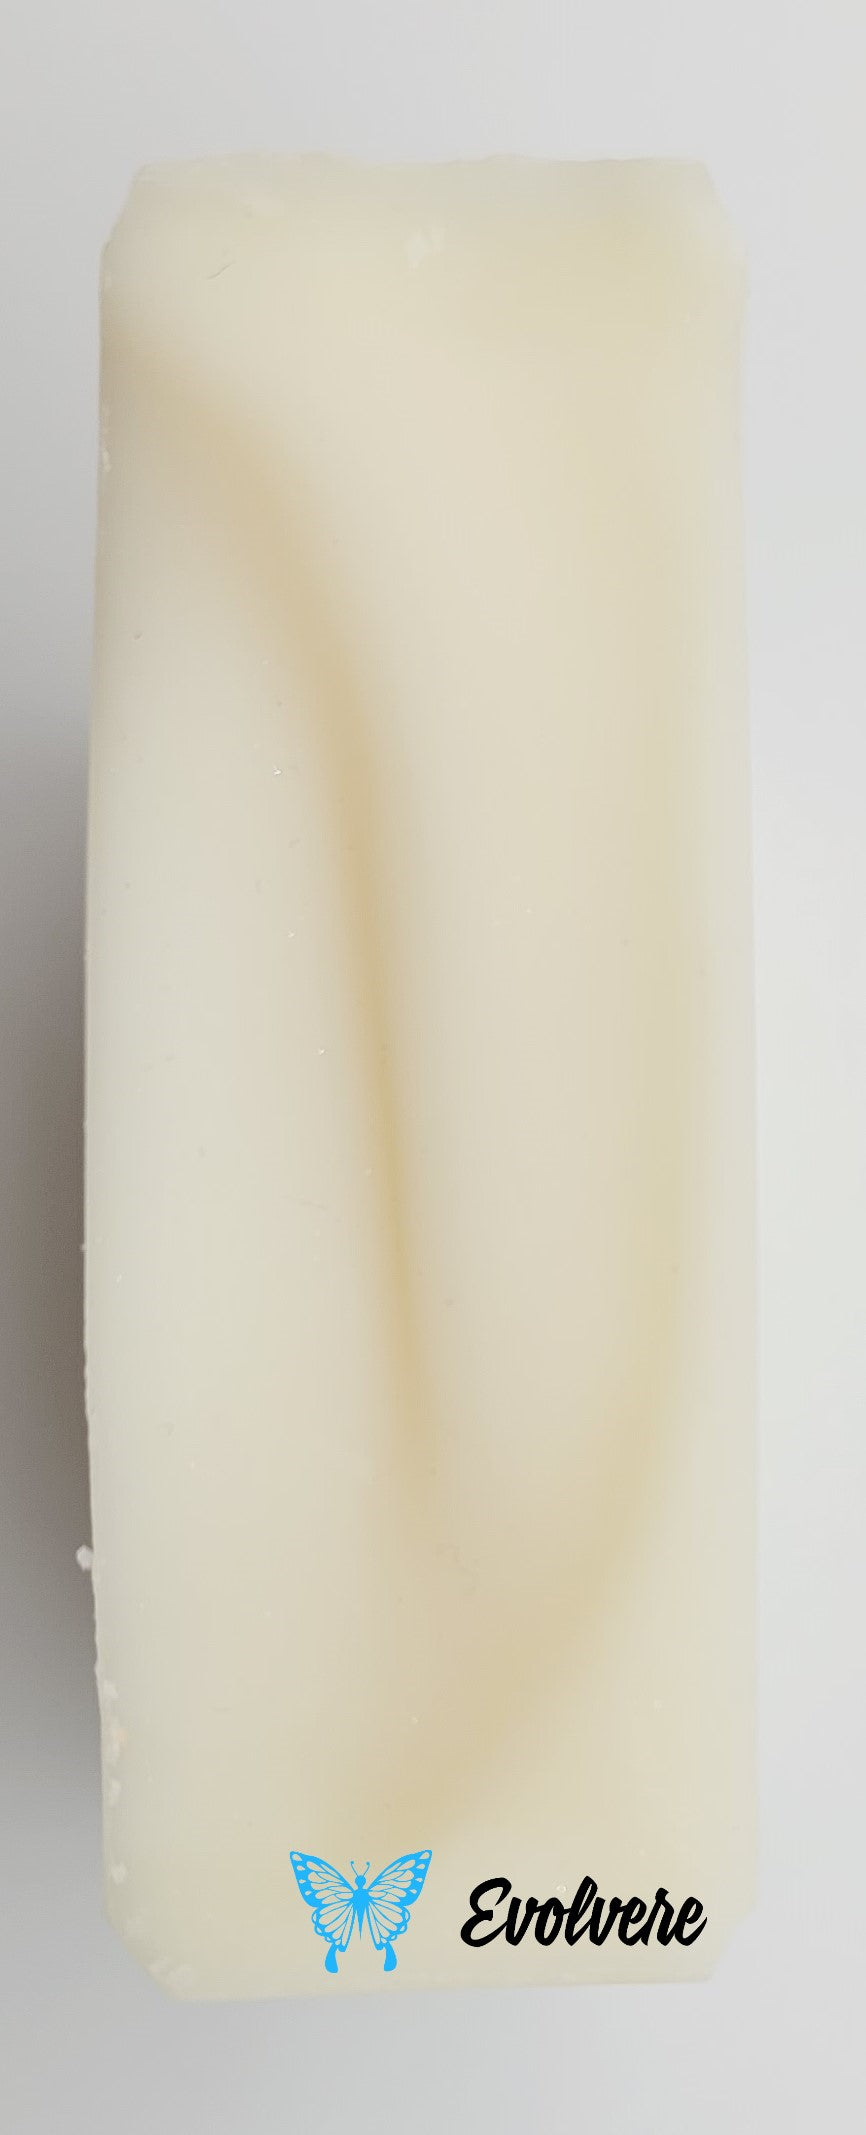 A simple unscented, uncolored soap.